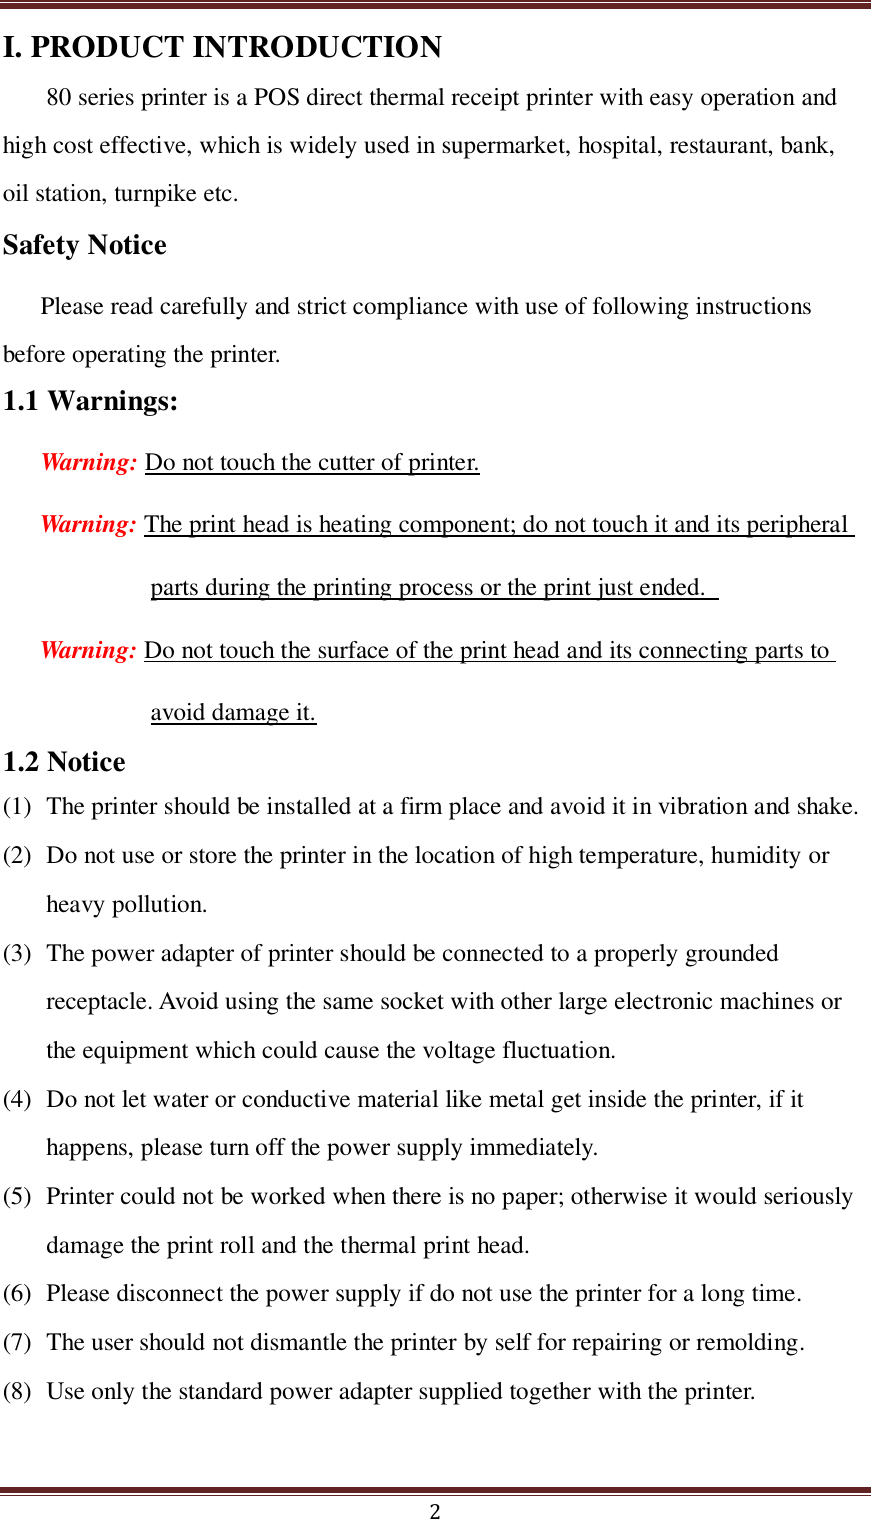  2 I. PRODUCT INTRODUCTION 80 series printer is a POS direct thermal receipt printer with easy operation and high cost effective, which is widely used in supermarket, hospital, restaurant, bank, oil station, turnpike etc. Safety Notice Please read carefully and strict compliance with use of following instructions before operating the printer. 1.1 Warnings: Warning: Do not touch the cutter of printer. Warning: The print head is heating component; do not touch it and its peripheral parts during the printing process or the print just ended.   Warning: Do not touch the surface of the print head and its connecting parts to avoid damage it. 1.2 Notice (1) The printer should be installed at a firm place and avoid it in vibration and shake.     (2) Do not use or store the printer in the location of high temperature, humidity or heavy pollution. (3) The power adapter of printer should be connected to a properly grounded receptacle. Avoid using the same socket with other large electronic machines or the equipment which could cause the voltage fluctuation.   (4) Do not let water or conductive material like metal get inside the printer, if it happens, please turn off the power supply immediately.   (5) Printer could not be worked when there is no paper; otherwise it would seriously damage the print roll and the thermal print head. (6) Please disconnect the power supply if do not use the printer for a long time.   (7) The user should not dismantle the printer by self for repairing or remolding. (8) Use only the standard power adapter supplied together with the printer. 